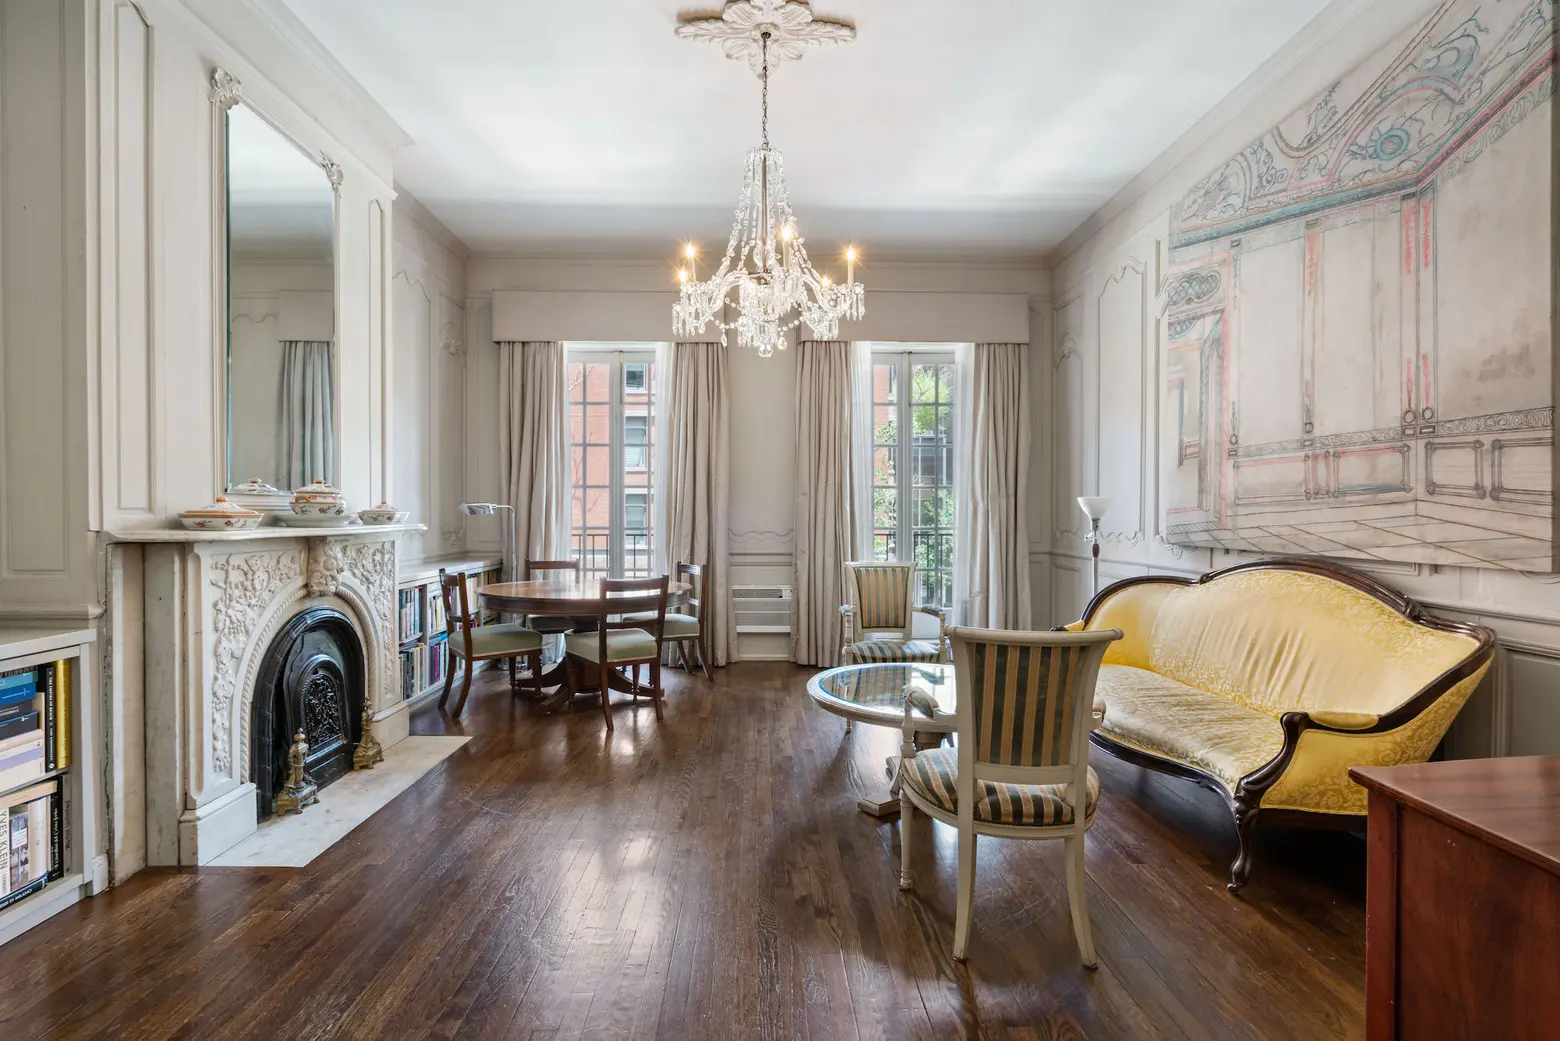 On a historic block in Chelsea, an elegant one-bedroom asks $1.6M